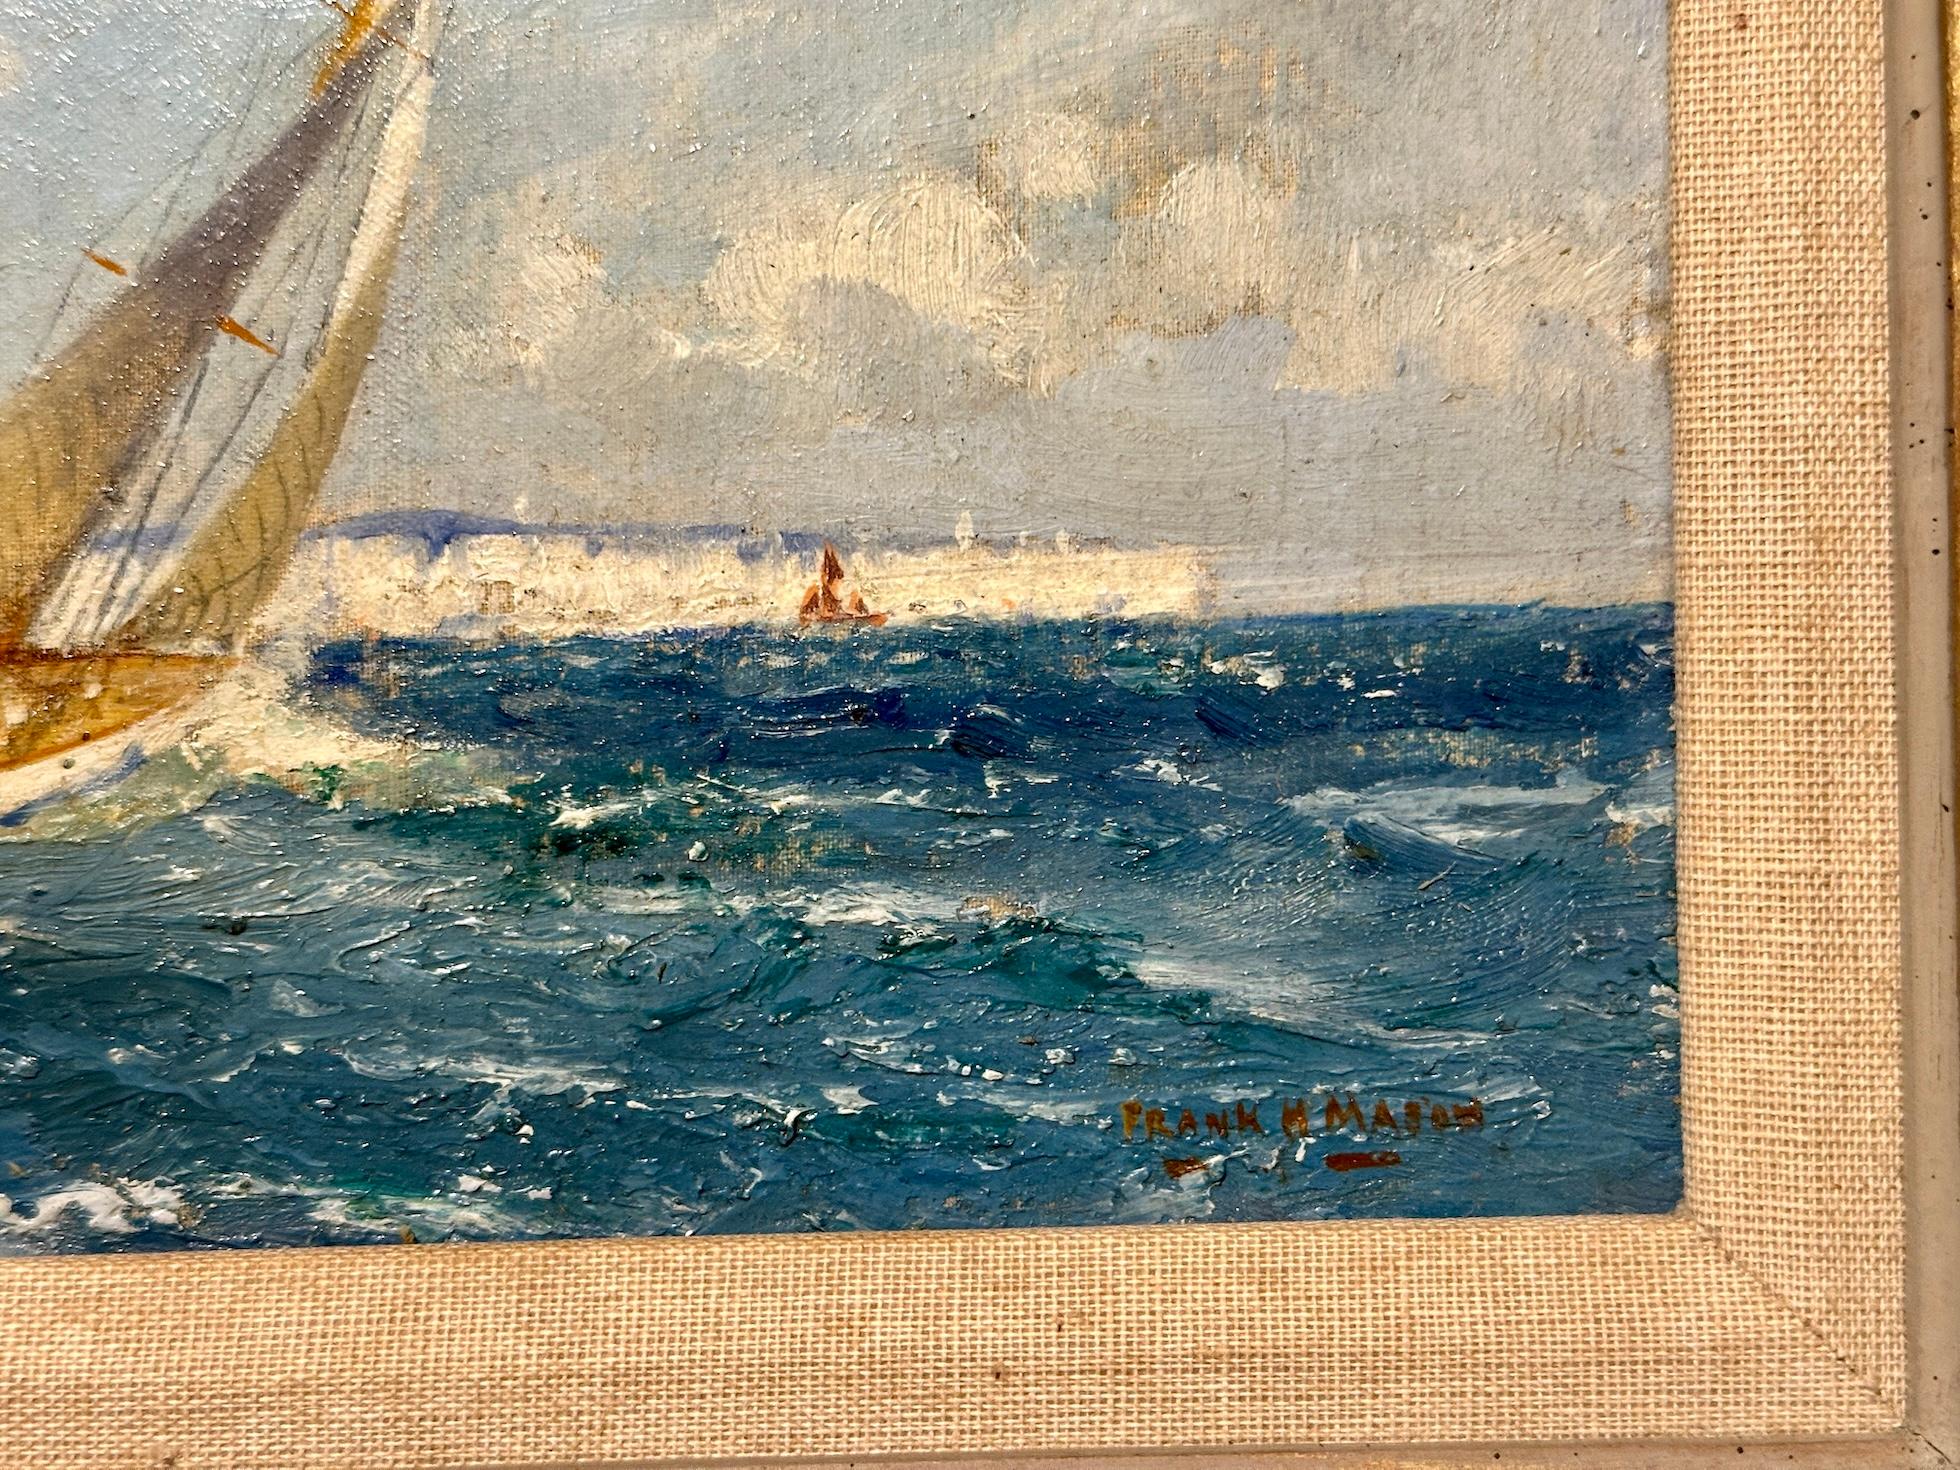 A Yacht racing or sailing in the English Channel off the White Cliffs of Dover by Frank H Mason.

Purchasing 